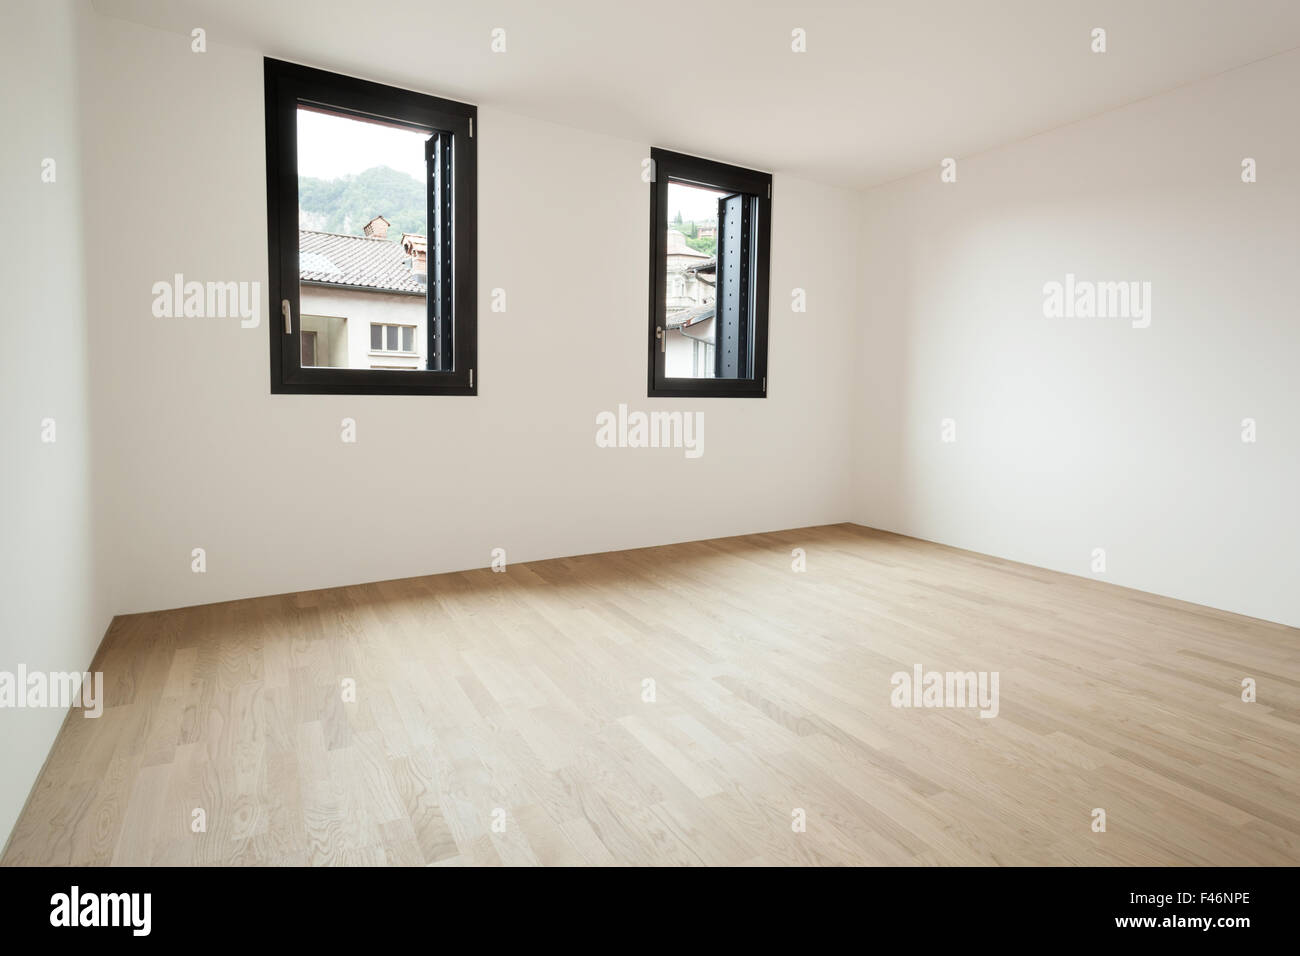 modern house interior, room with two windows Stock Photo